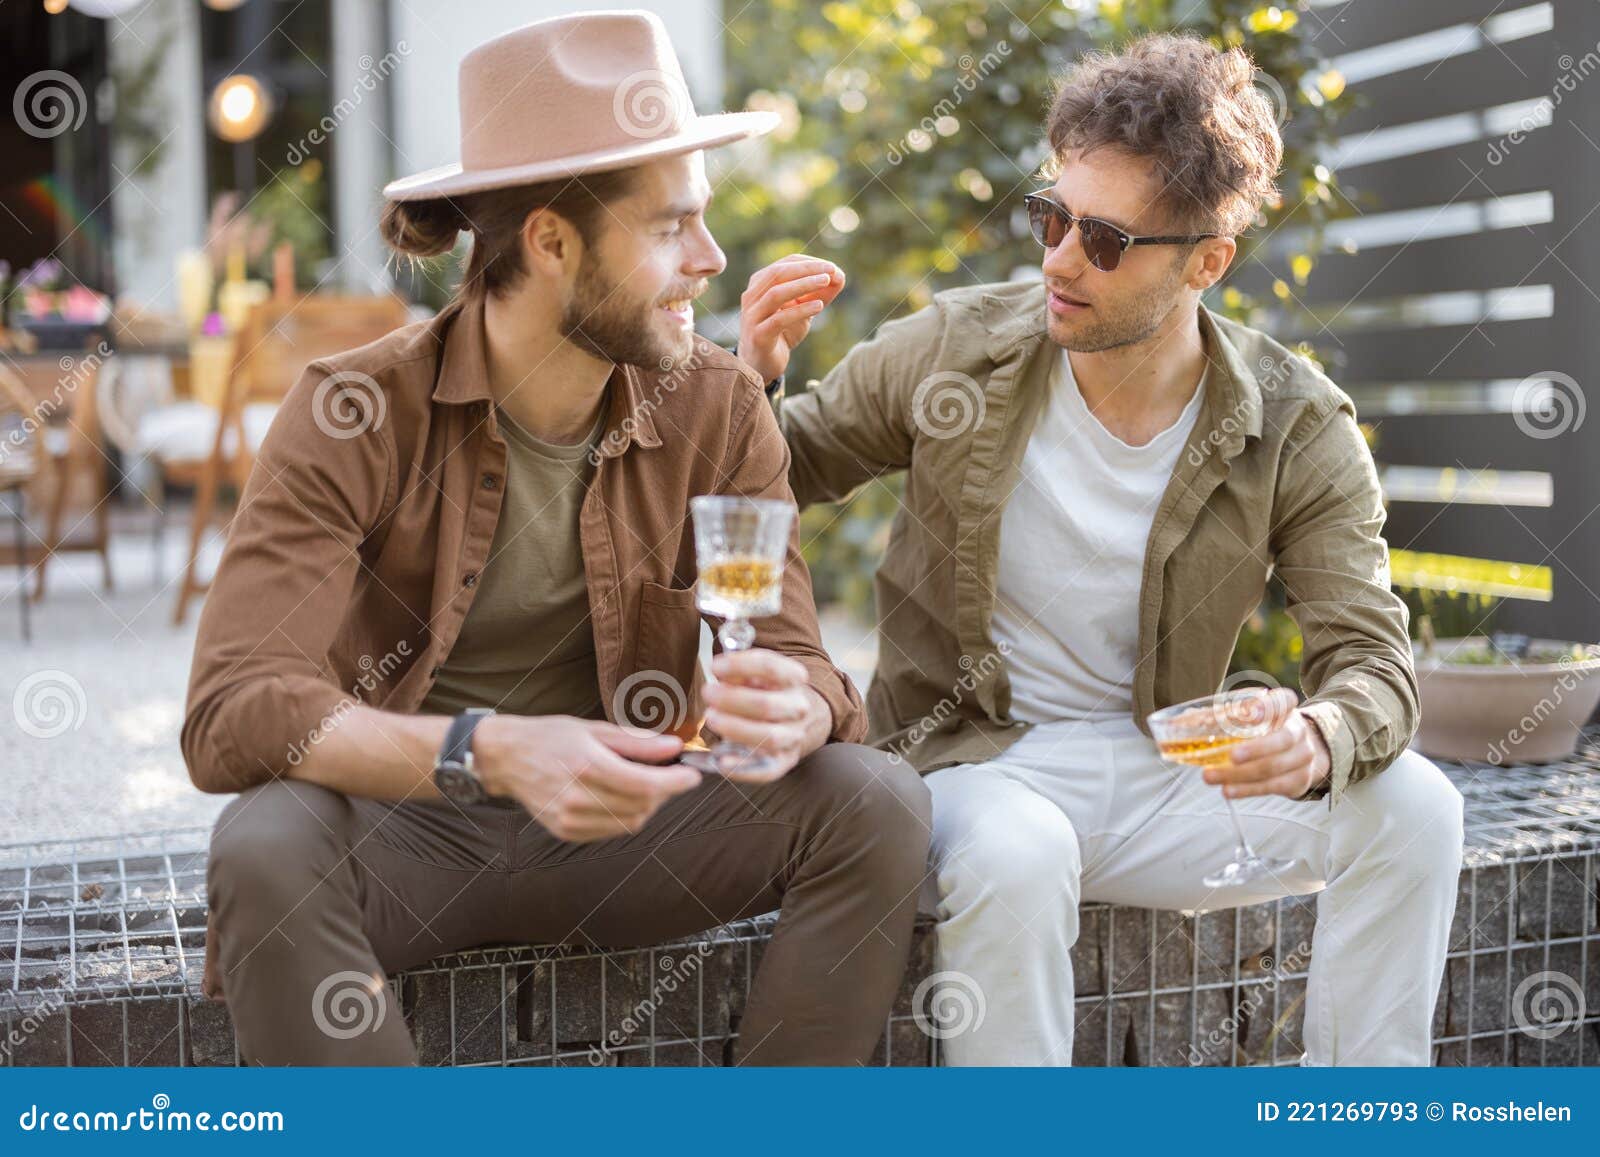 two male friends talking on a porch of the country house